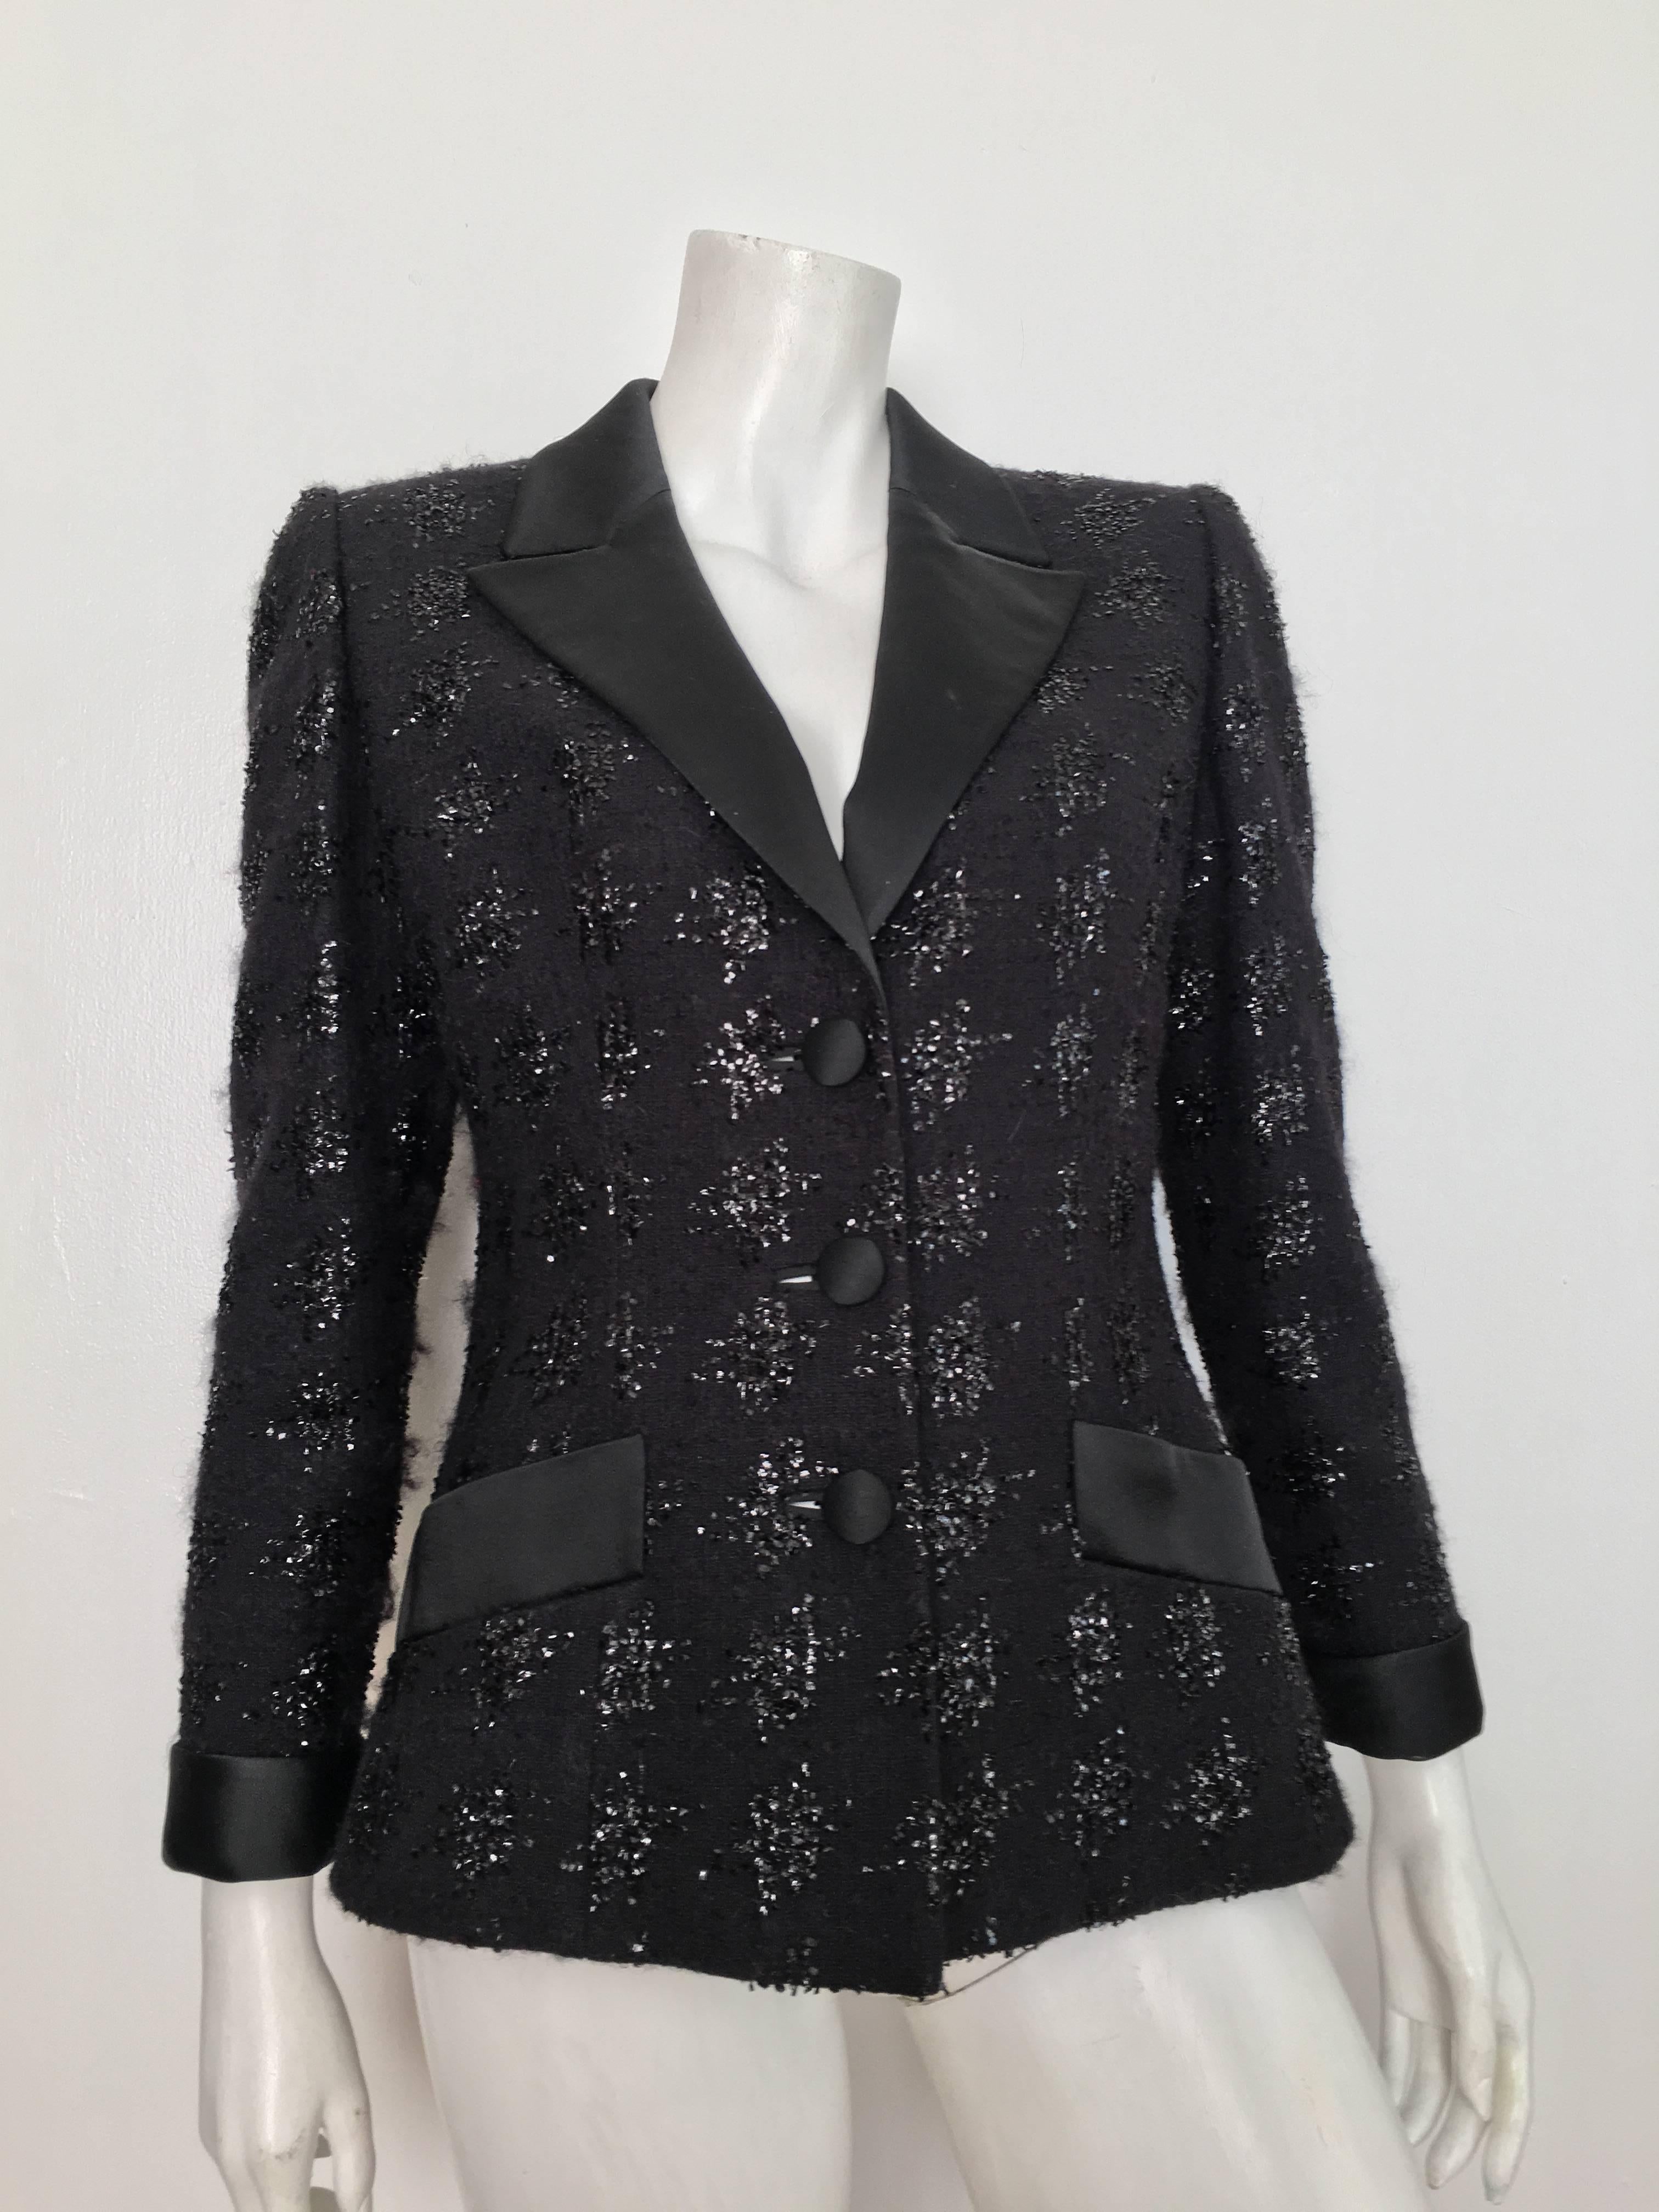 Richard Carriere Paris 1980s black wool & mohair tuxedo jacket is labeled a French size 42 and fits like a size 6.  This gorgeous Carriere tuxedo jacket is just gorgeous and timeless, it looks just as classic today as when it was designed.  It has